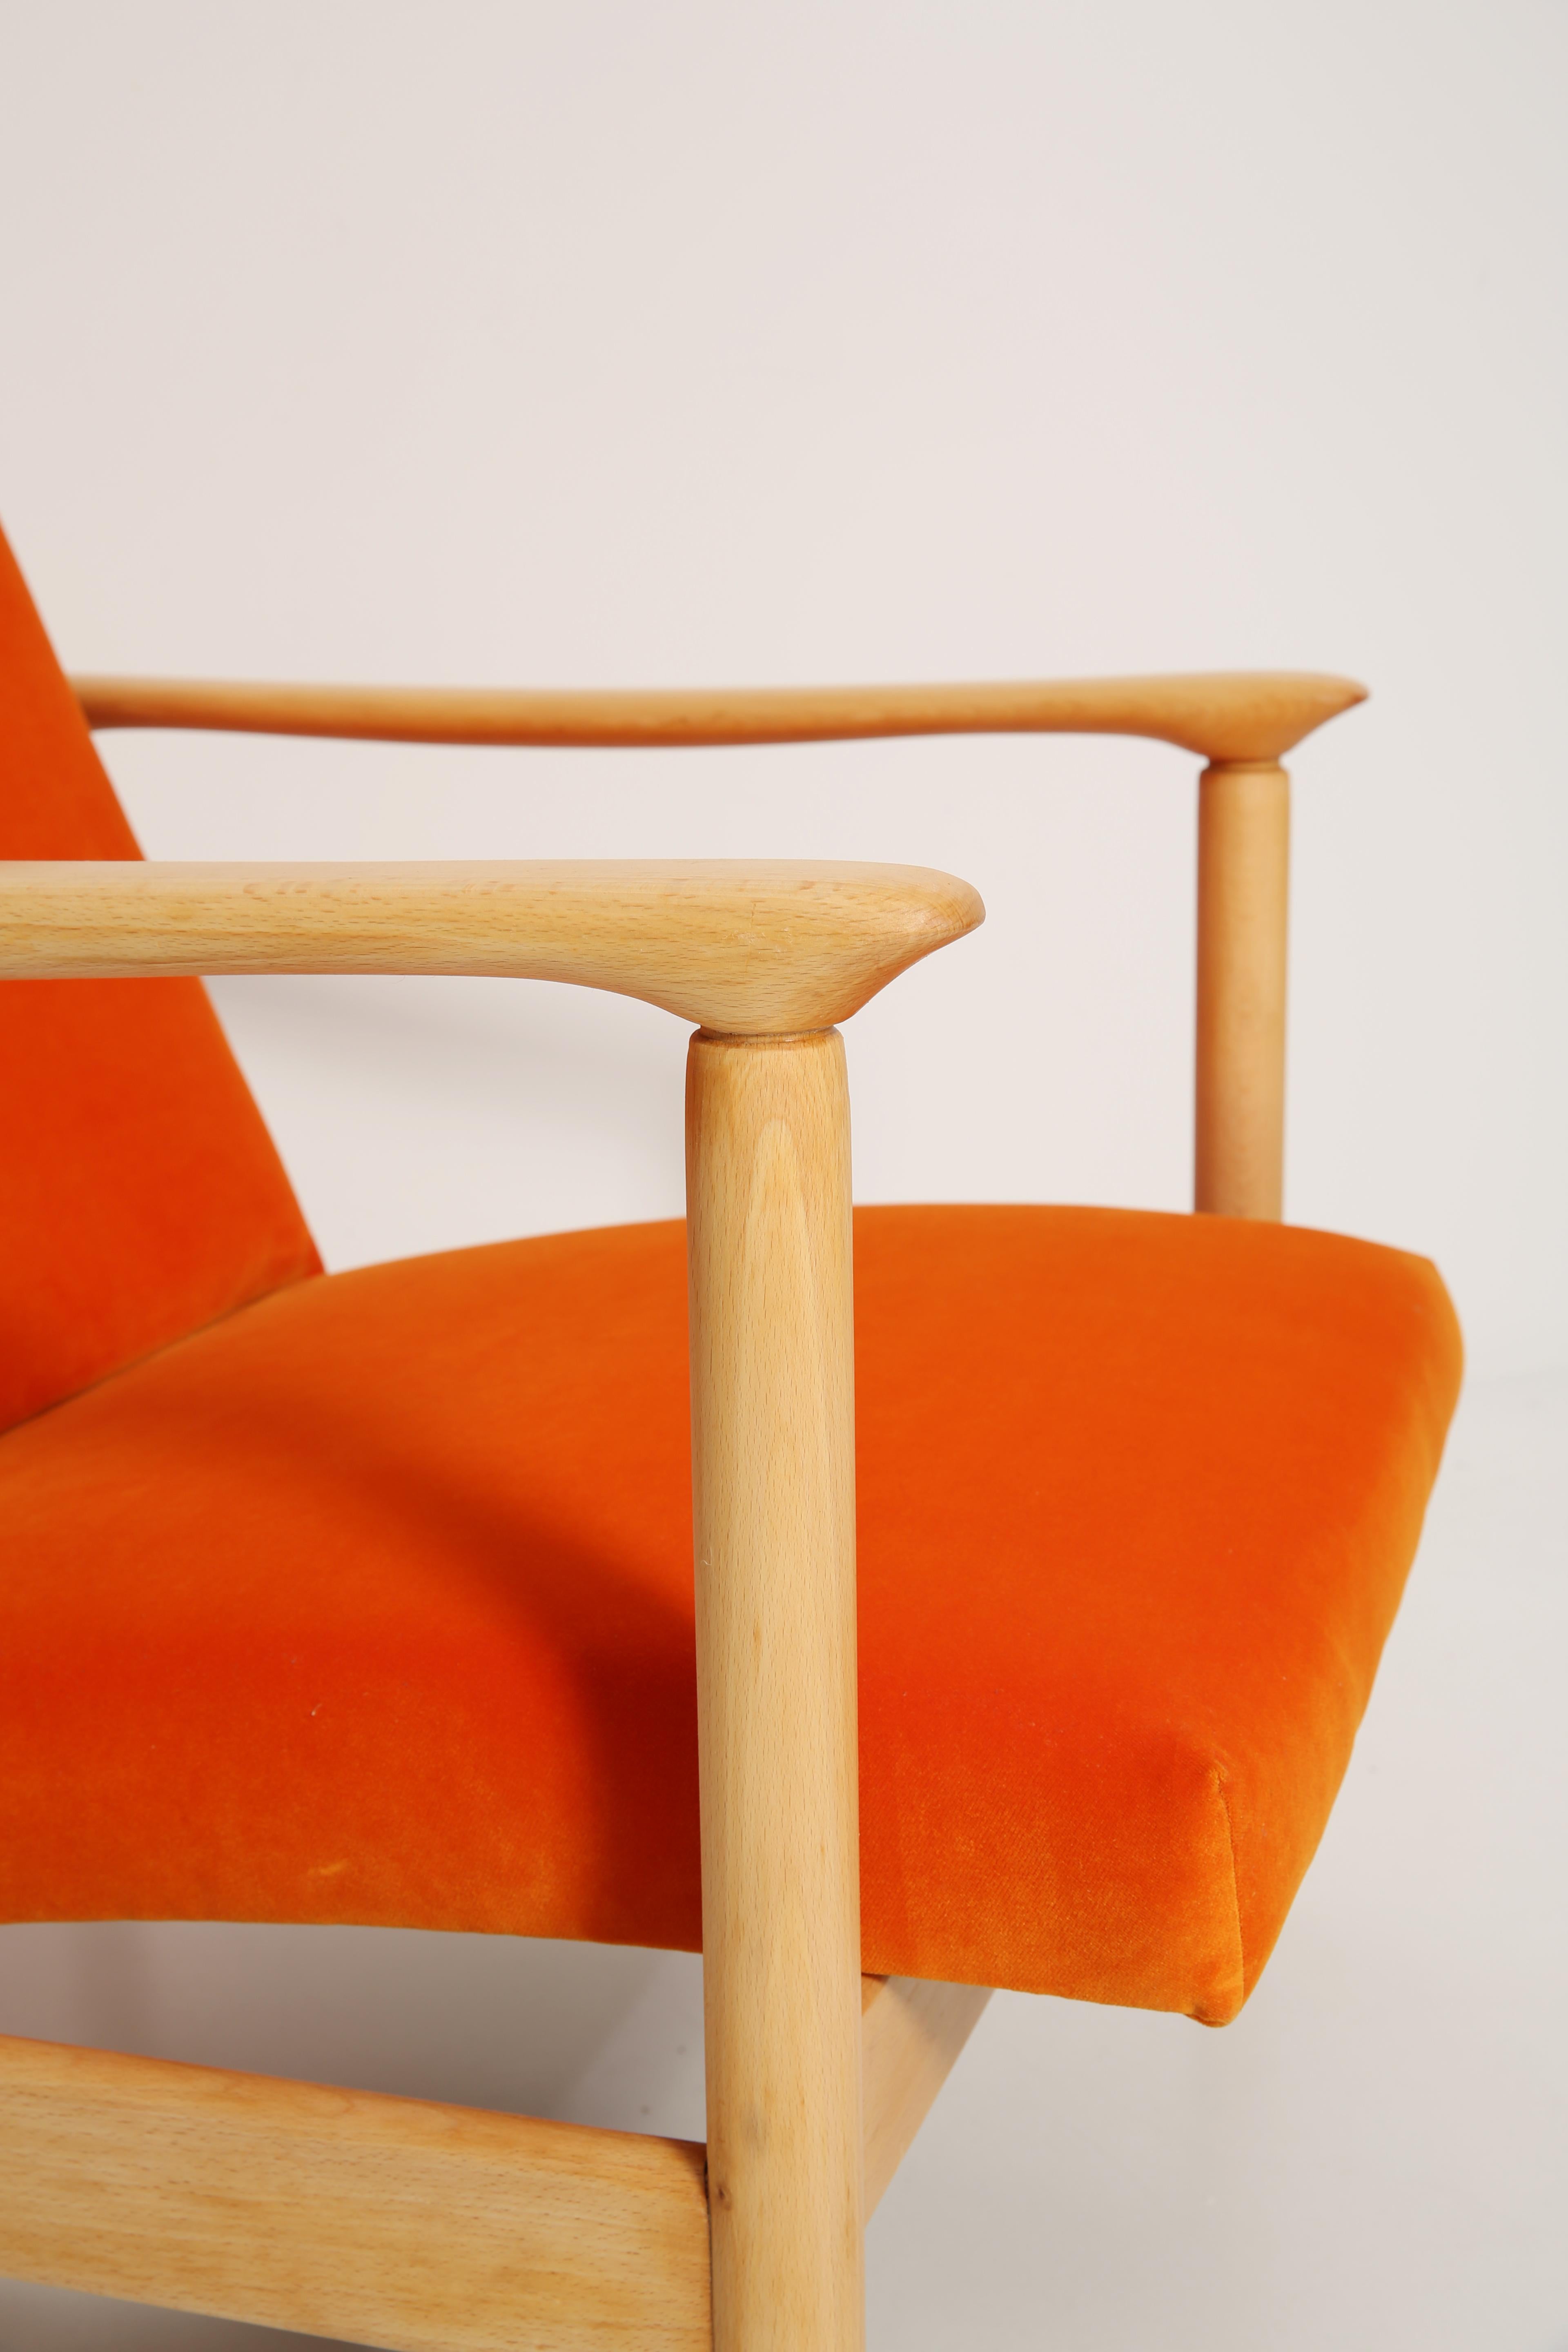 Hand-Crafted Set of Two Mid-20th Century Orange Velvet Armchairs, Edmund Homa, Europe, 1960s For Sale